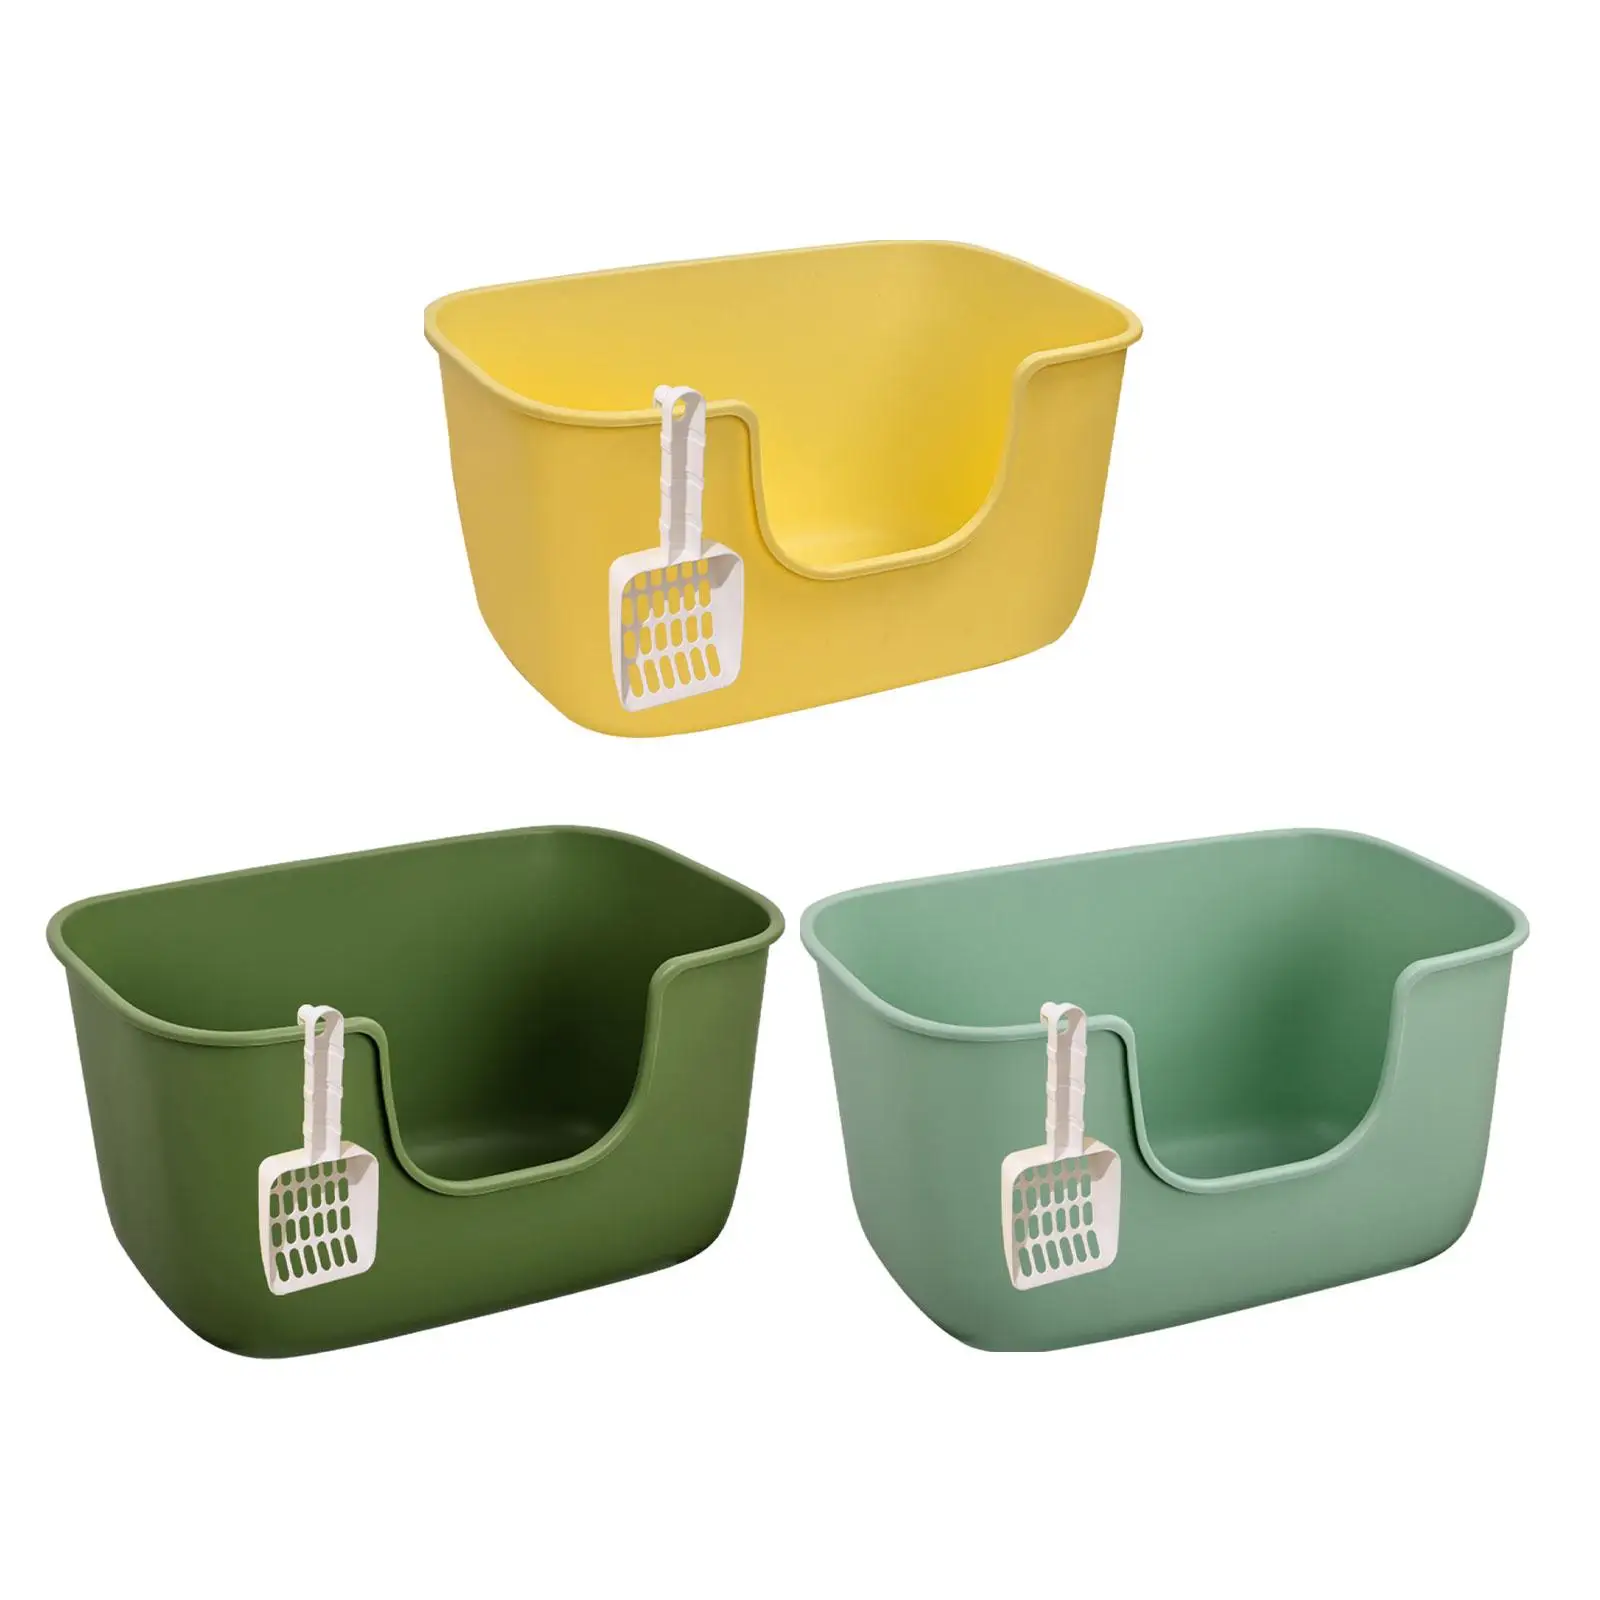 Open Top Cat Litters Box Easy to Clean Cage Accessories Cat Small Dogs Bedpan for Indoor Cats Kitty Small Animals Rabbit